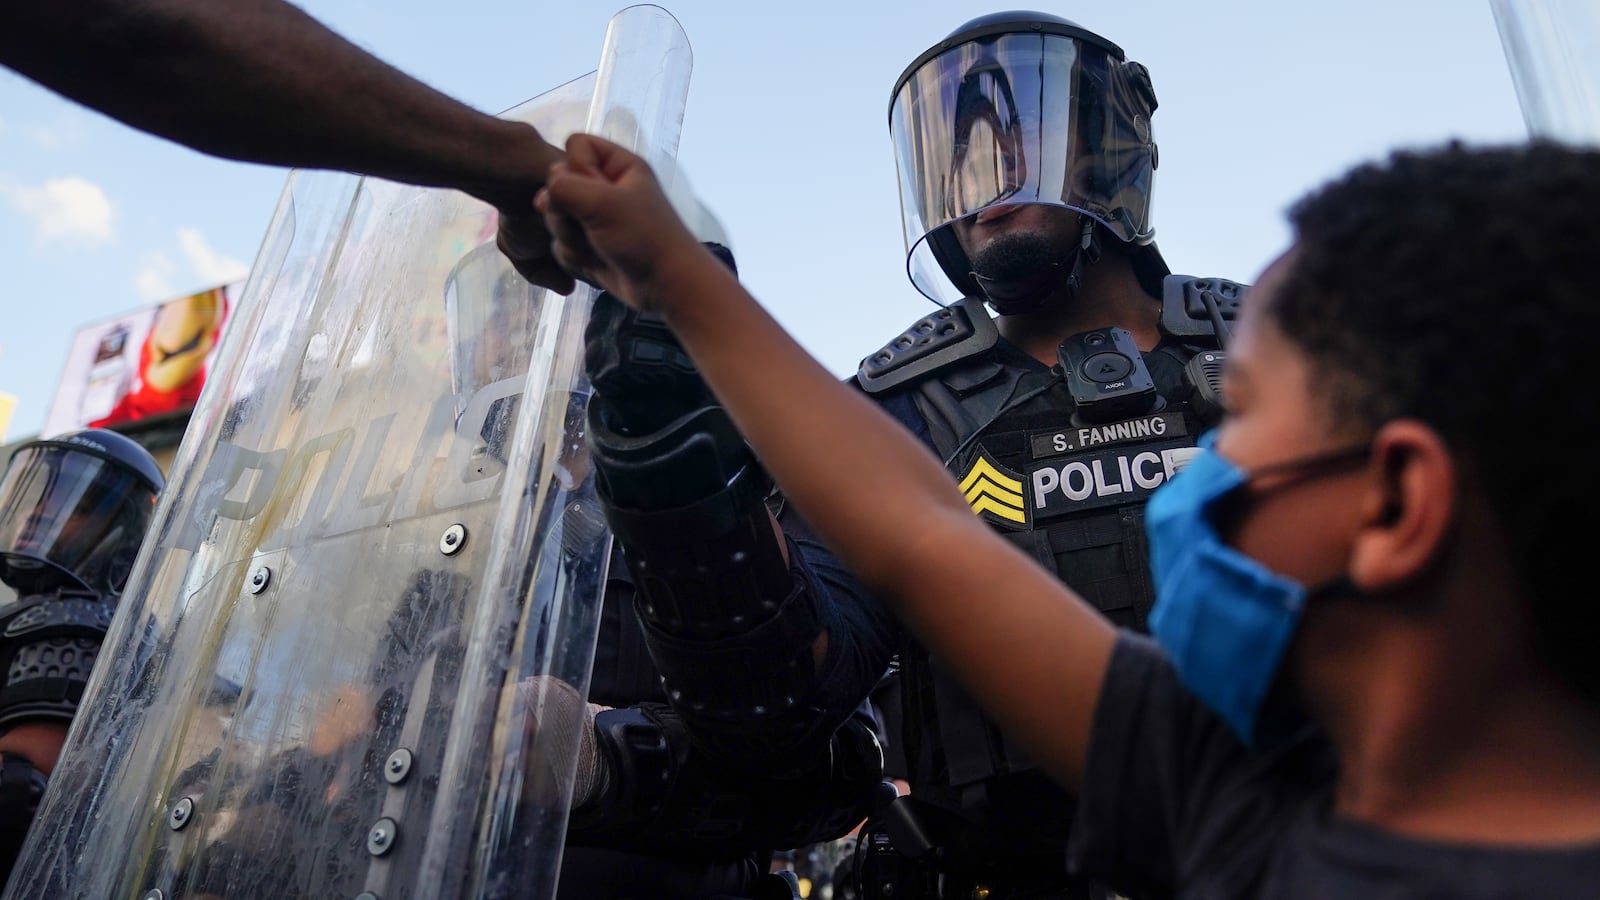 A young boy in a blue protective mask raises his fist as a protester bumps his fist with a police officer in full riot gear, surrounded by several other police.